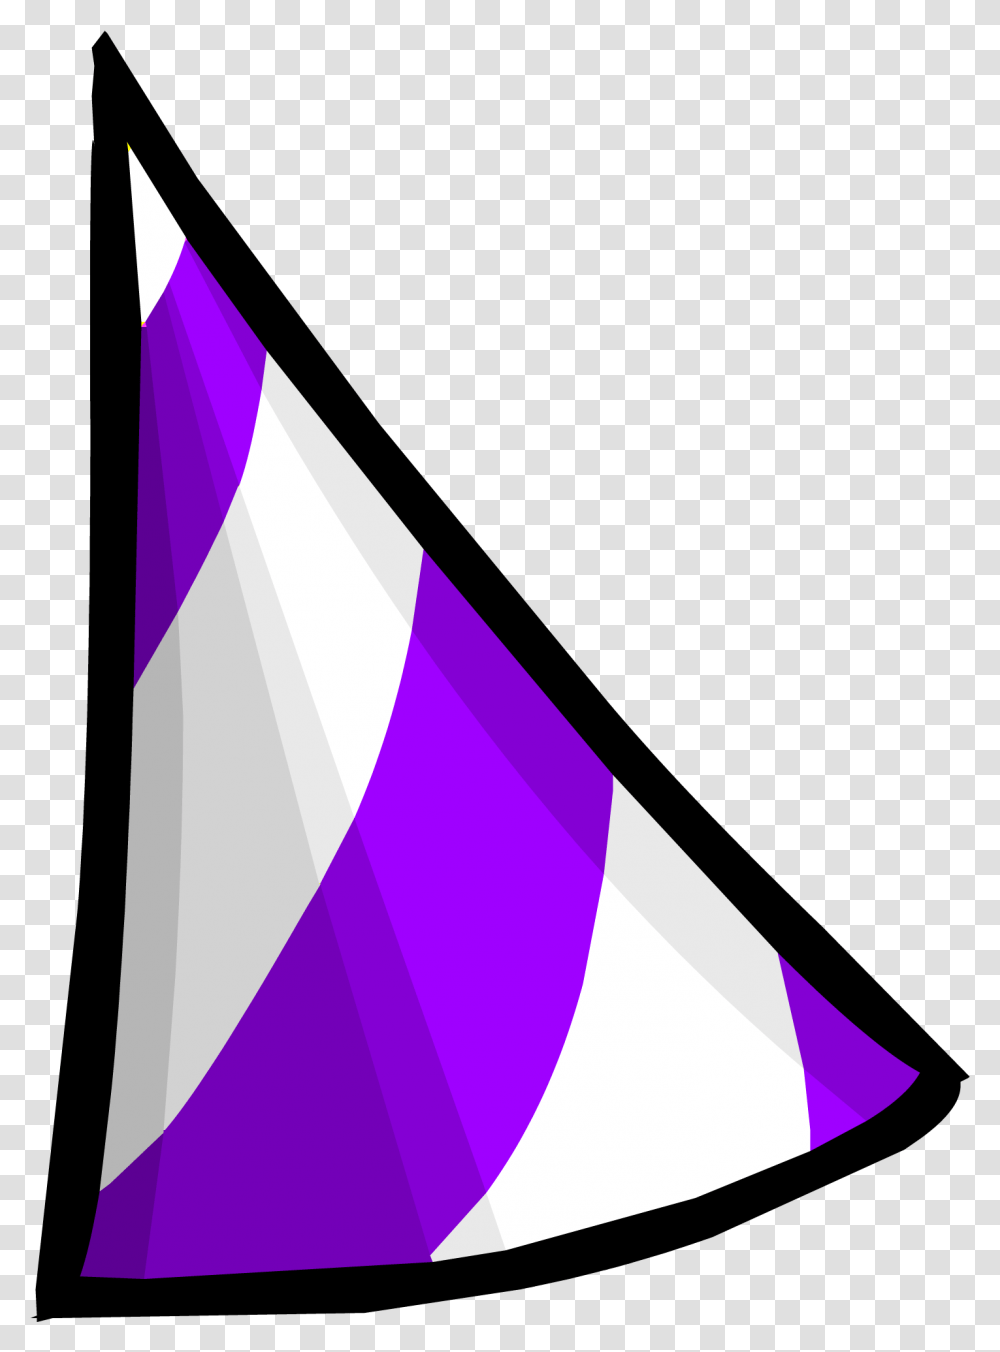 Categoryparty Items Club Penguin Rewritten Wiki Fandom Club Penguin Party Hat, Clothing, Apparel, Cone, Triangle Transparent Png